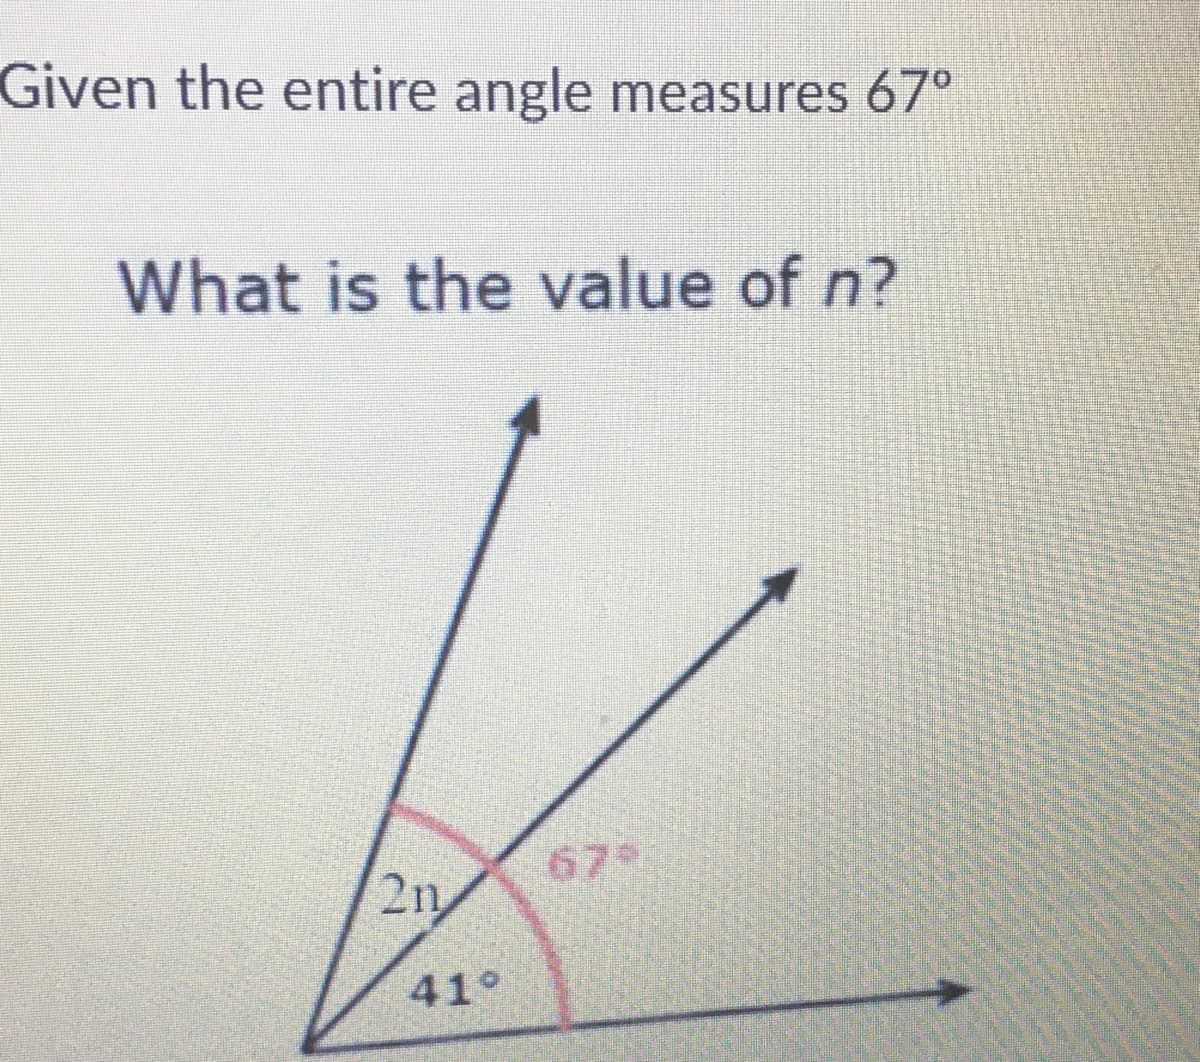 Given the entire angle measures 67°
What is the value of n?
2n
67
41°
